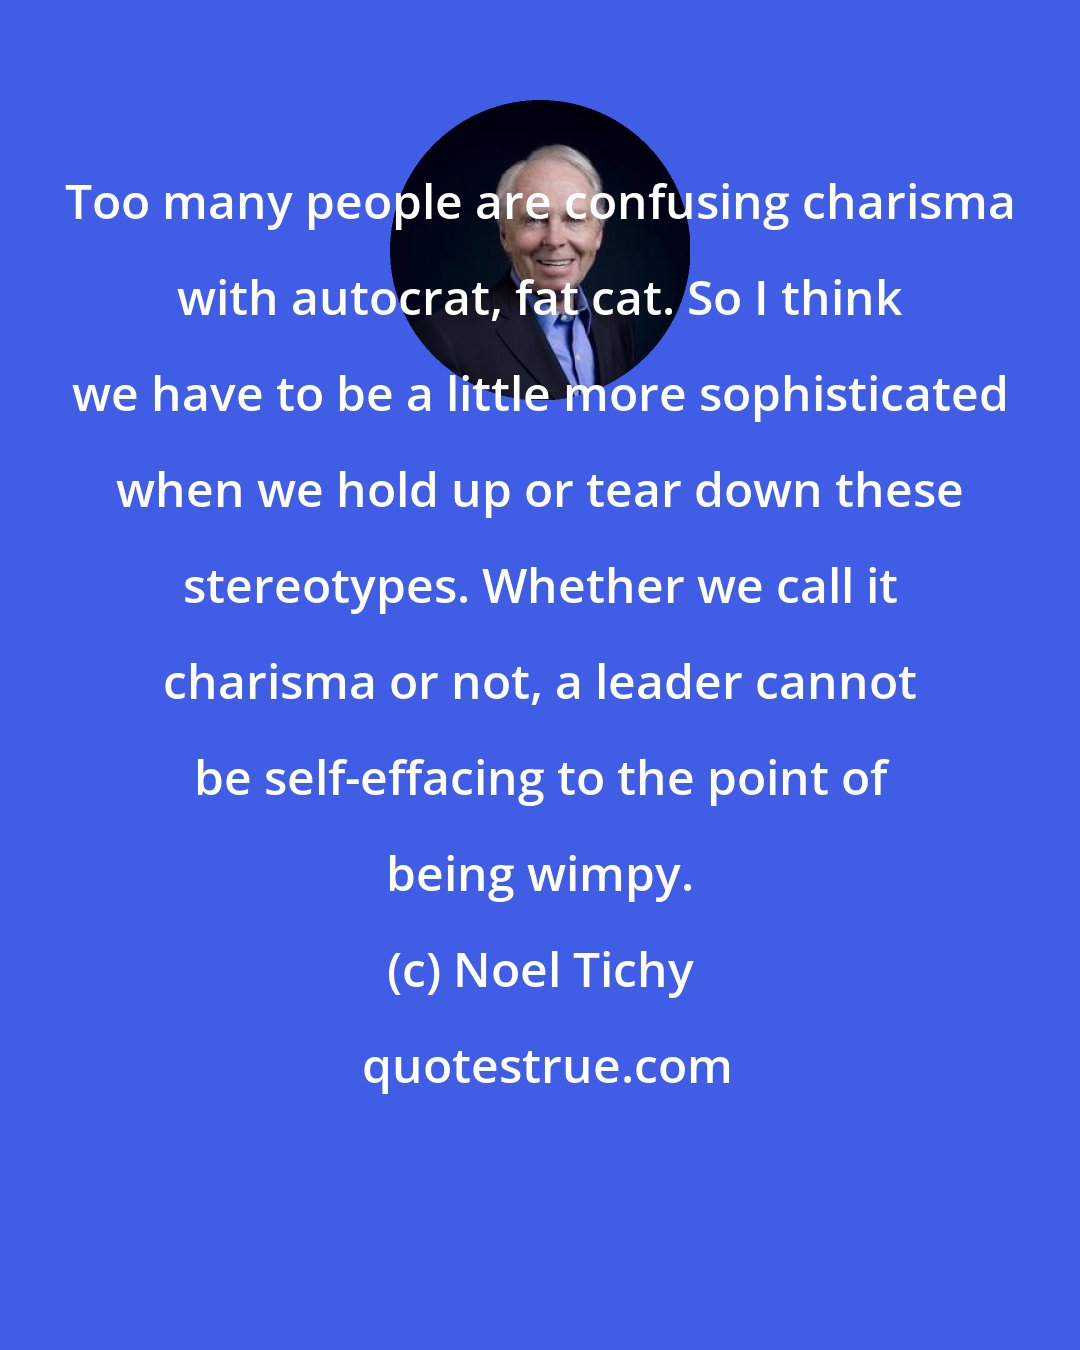 Noel Tichy: Too many people are confusing charisma with autocrat, fat cat. So I think we have to be a little more sophisticated when we hold up or tear down these stereotypes. Whether we call it charisma or not, a leader cannot be self-effacing to the point of being wimpy.